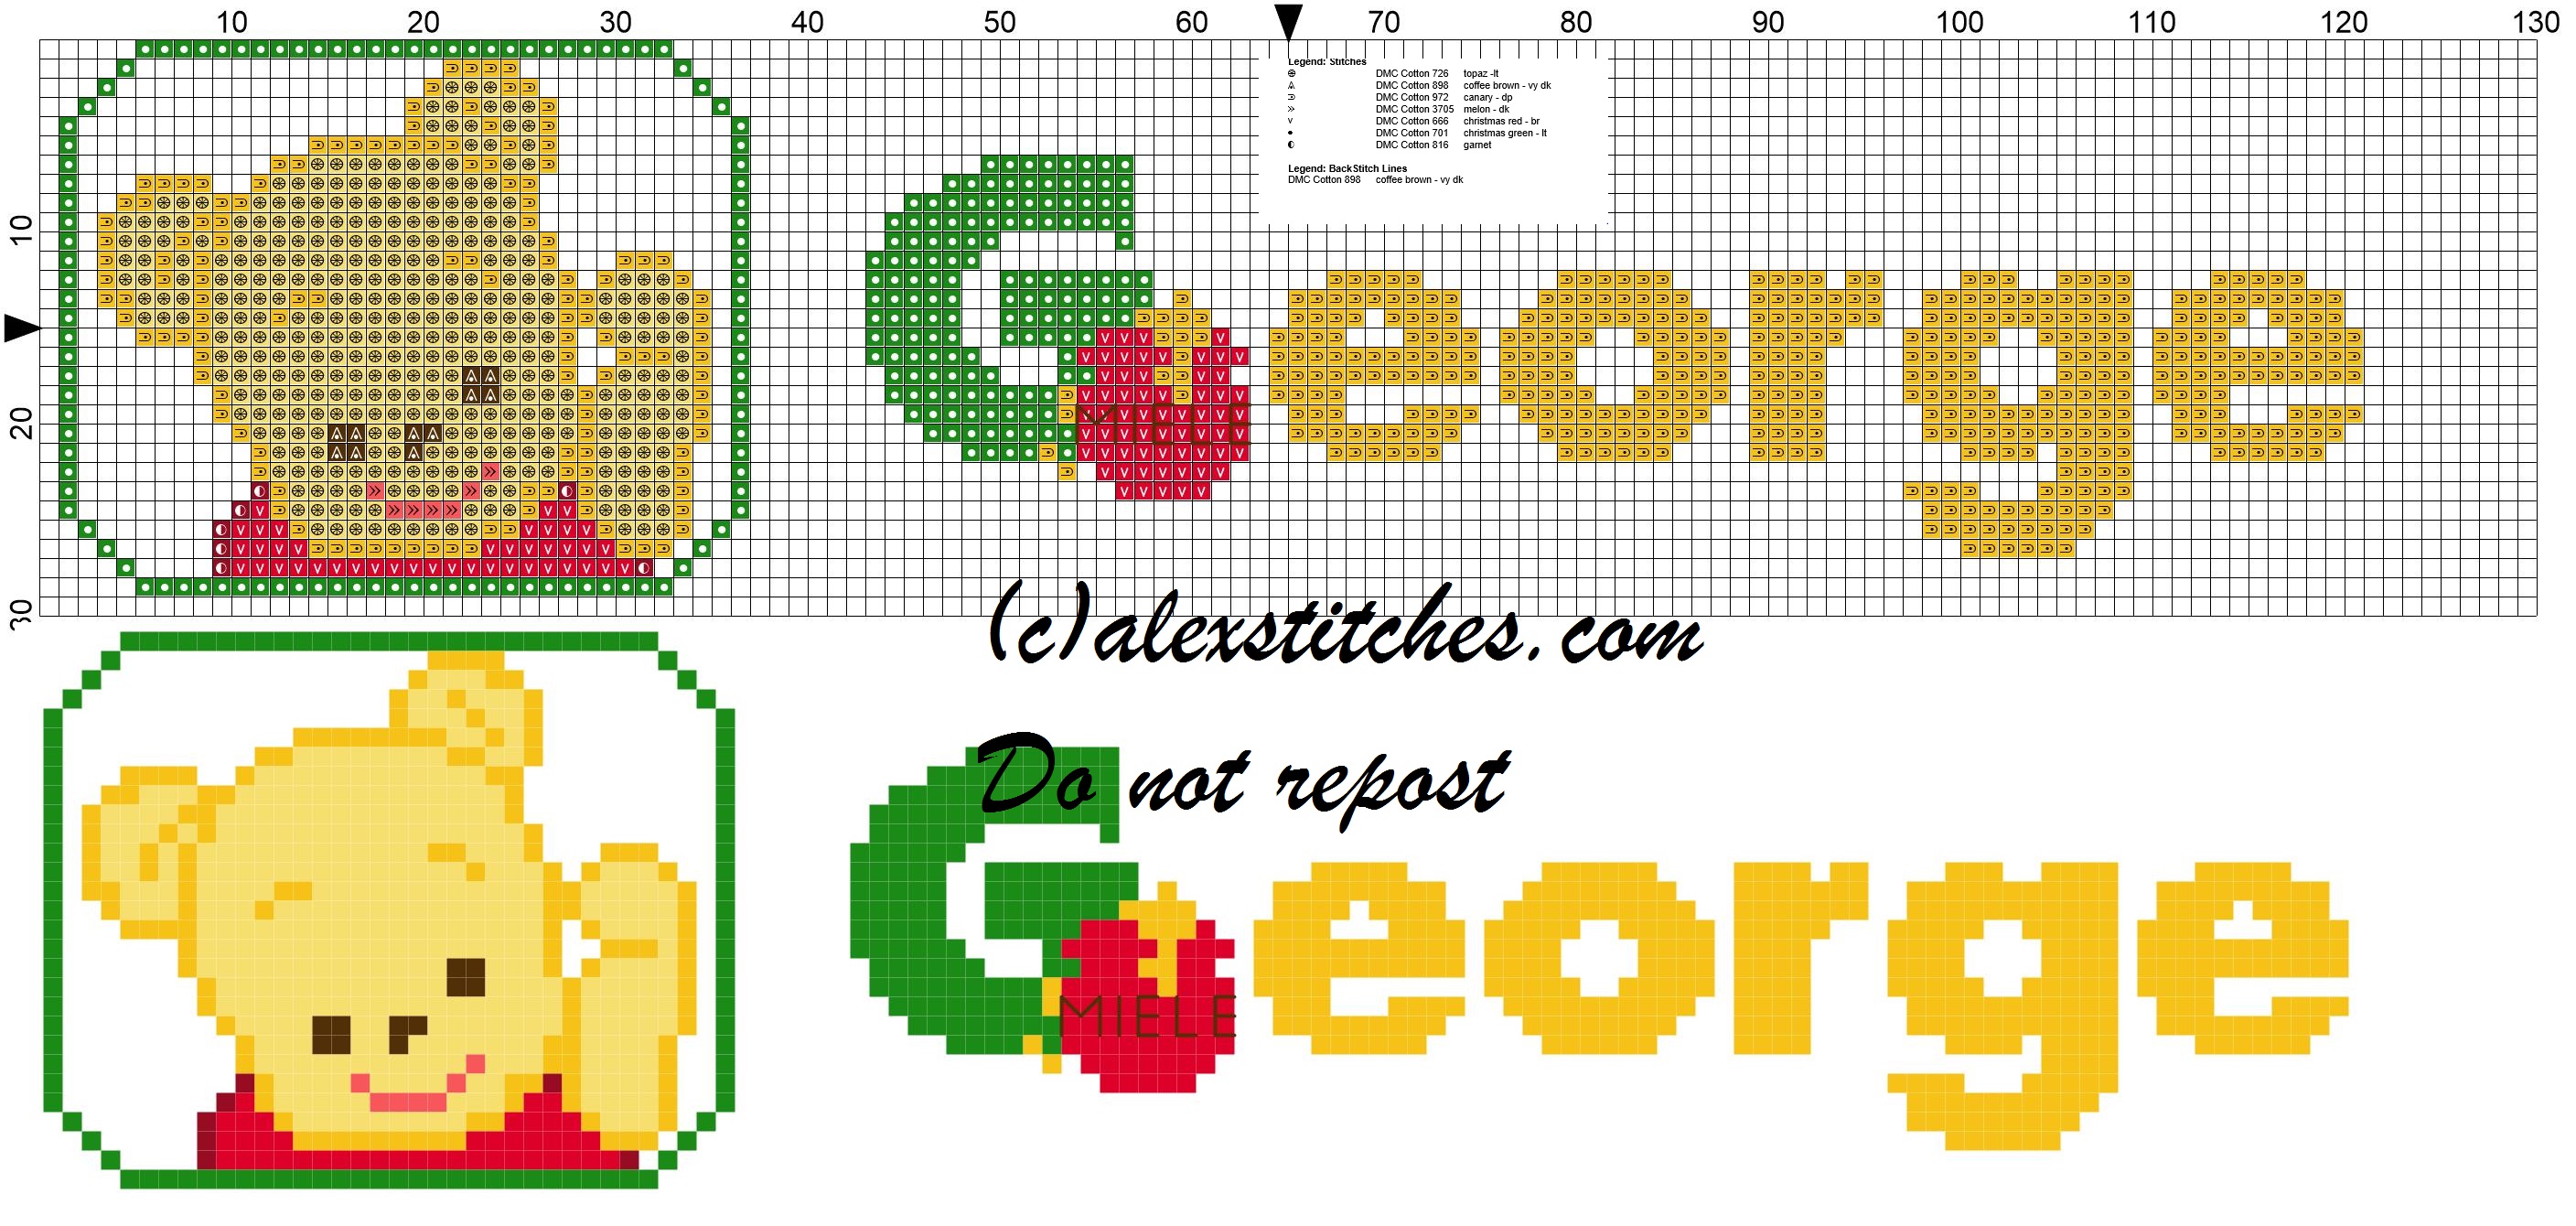 George name with Baby winnie the pooh free cross stitches pattern